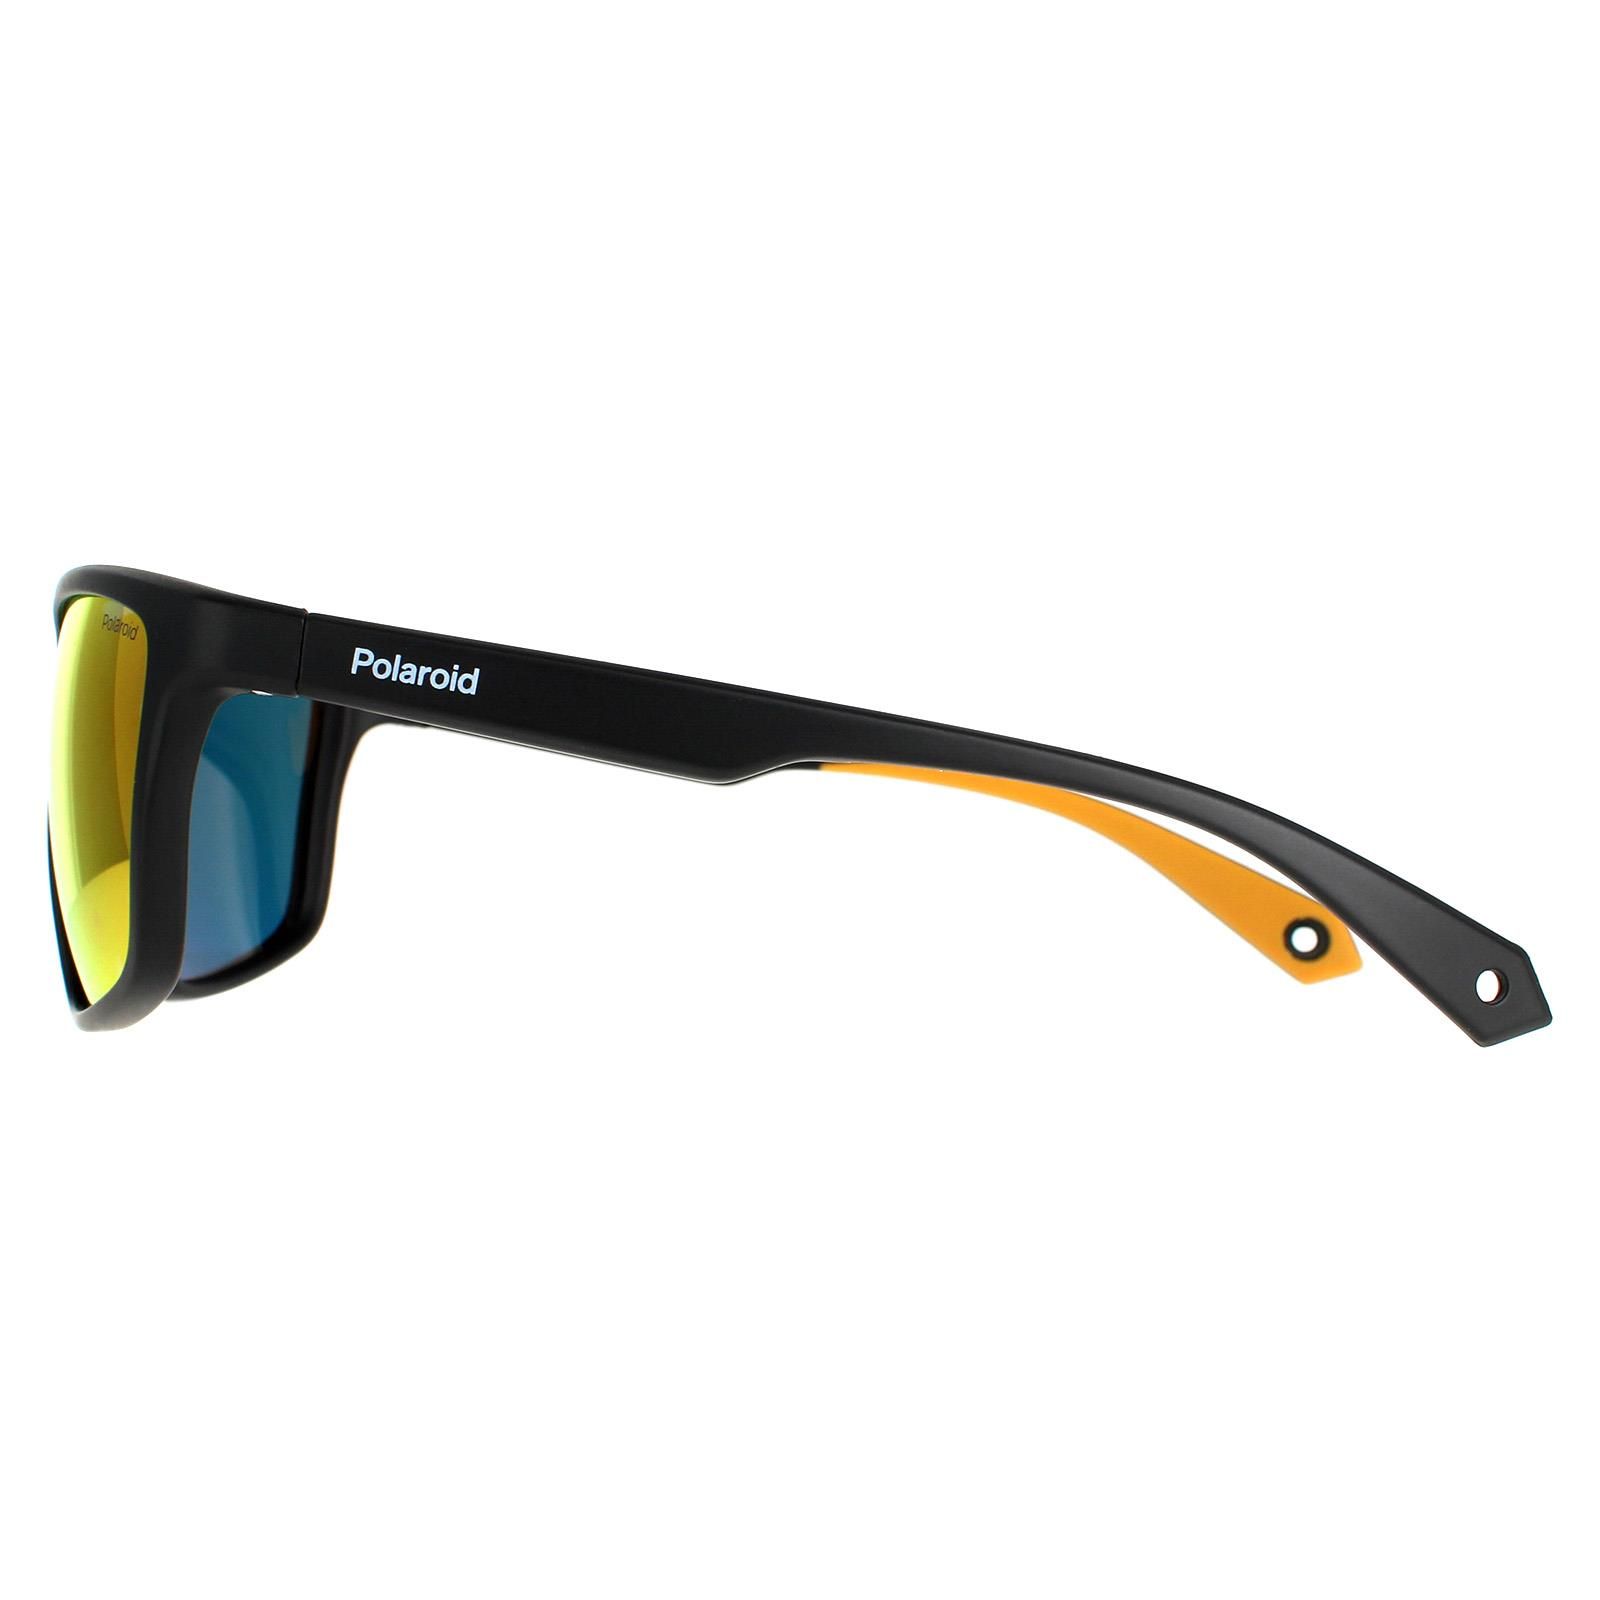 Polaroid Wrap Mens Black Yellow Red Mirror Polarized PLD 7040/S  Polaroid are a sporty wrap around style made from lightweight plastic with Polaroid branding on the temples and a strap removable strap to hold the sunglasses in place.